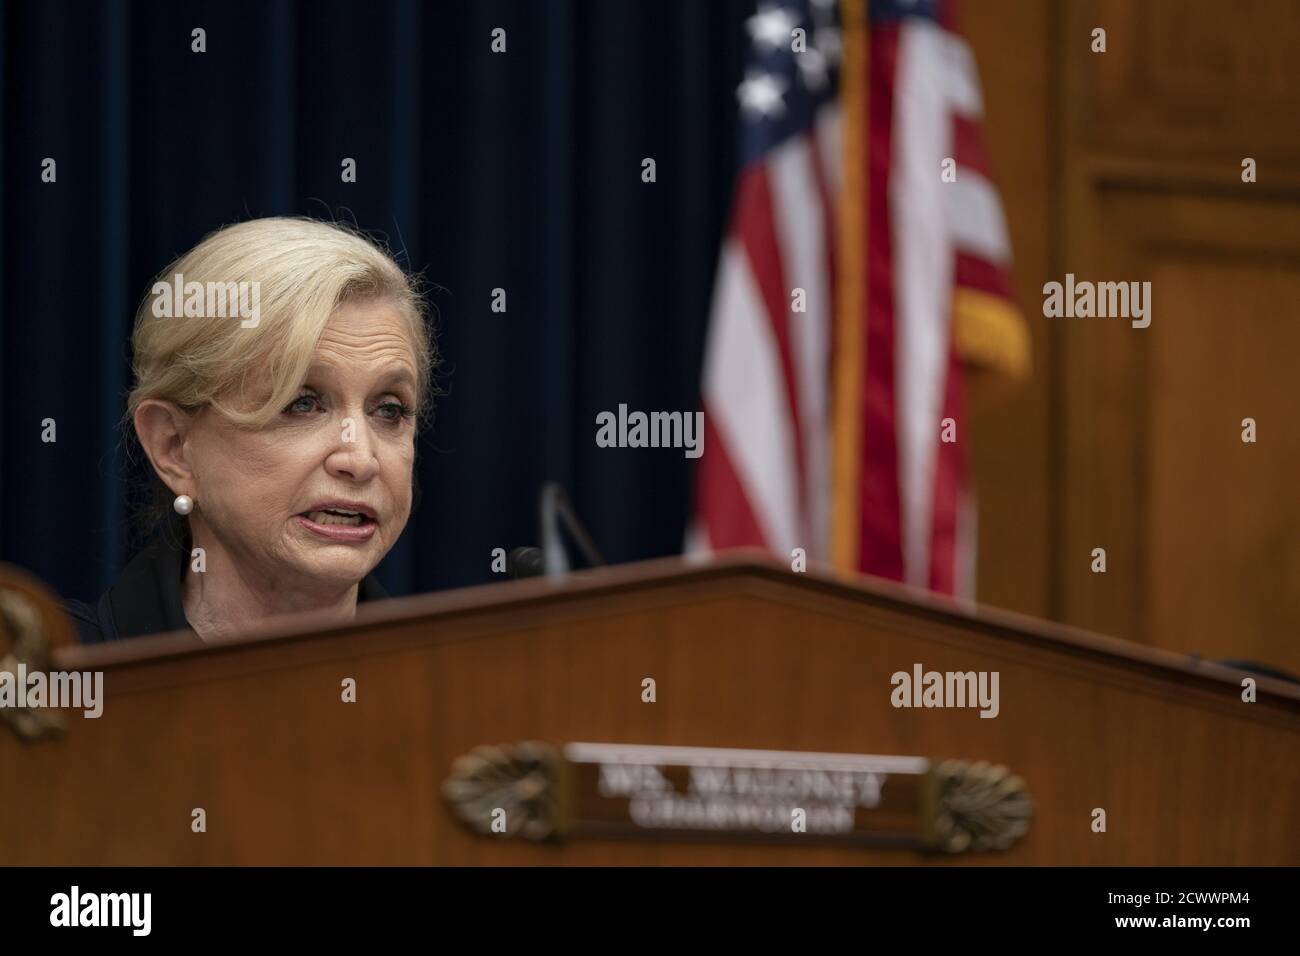 Washington, United States. 30th Sep, 2020. Chairwoman Carolyn Maloney delivers her opening statement during a hearing before the U.S. House of Representatives Committee on Oversight and Reform focused on the cost of prescription drugs at the US Capitol Building in Washington, DC, on Wednesday, September 30, 2020. Several CEO's of drug companies will testify. Pool Photo by Alex Edelman/UPI Credit: UPI/Alamy Live News Stock Photo